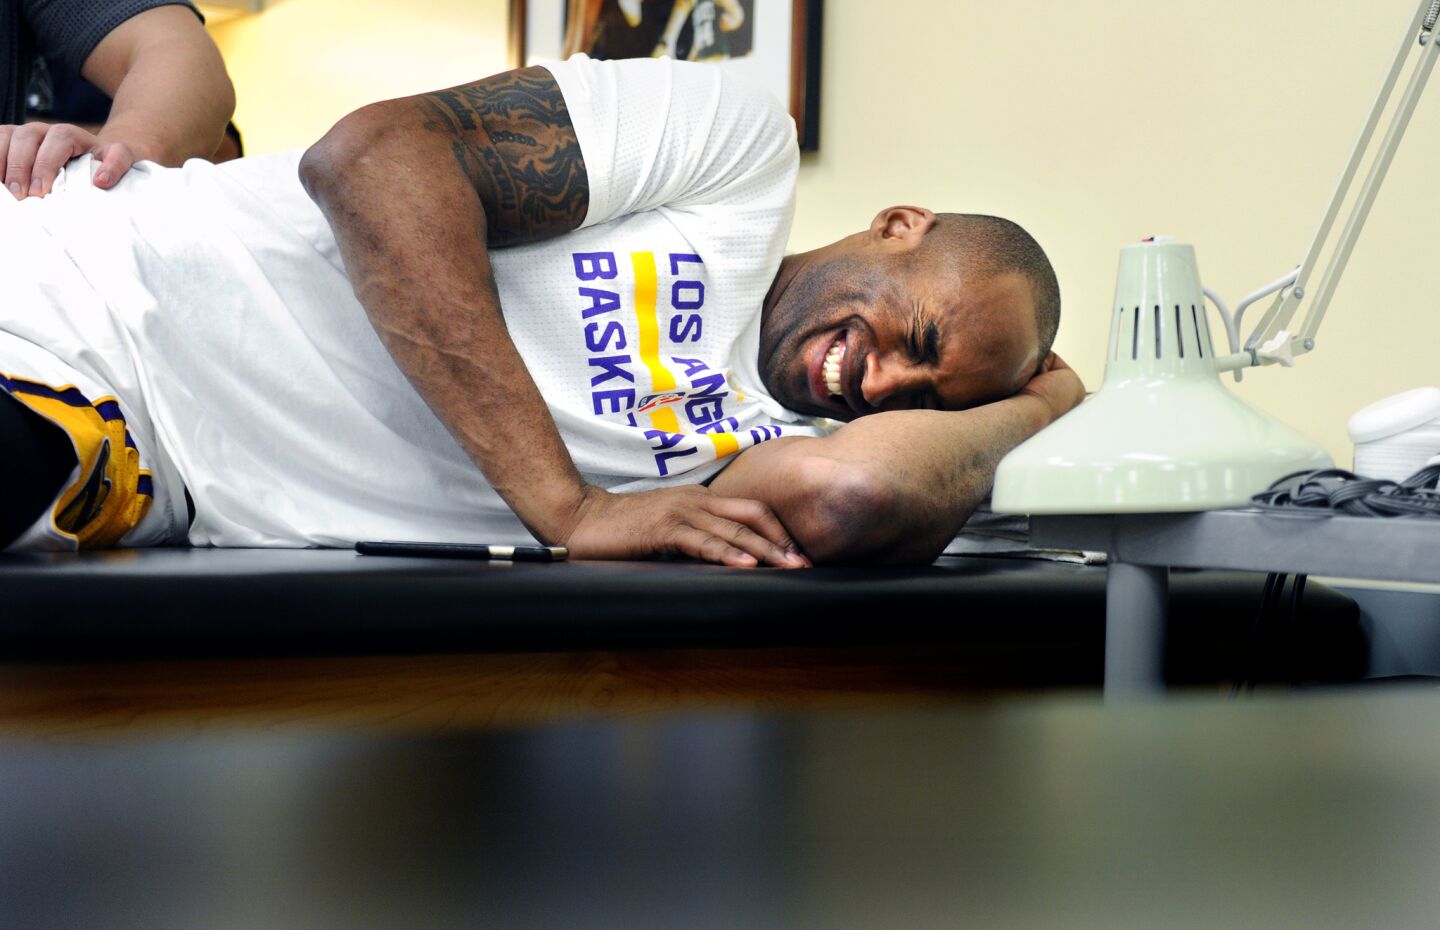 Lakers Kobe Bryant laughs while stretching in the trainers room before a game with the Knicks at the Staples Center.